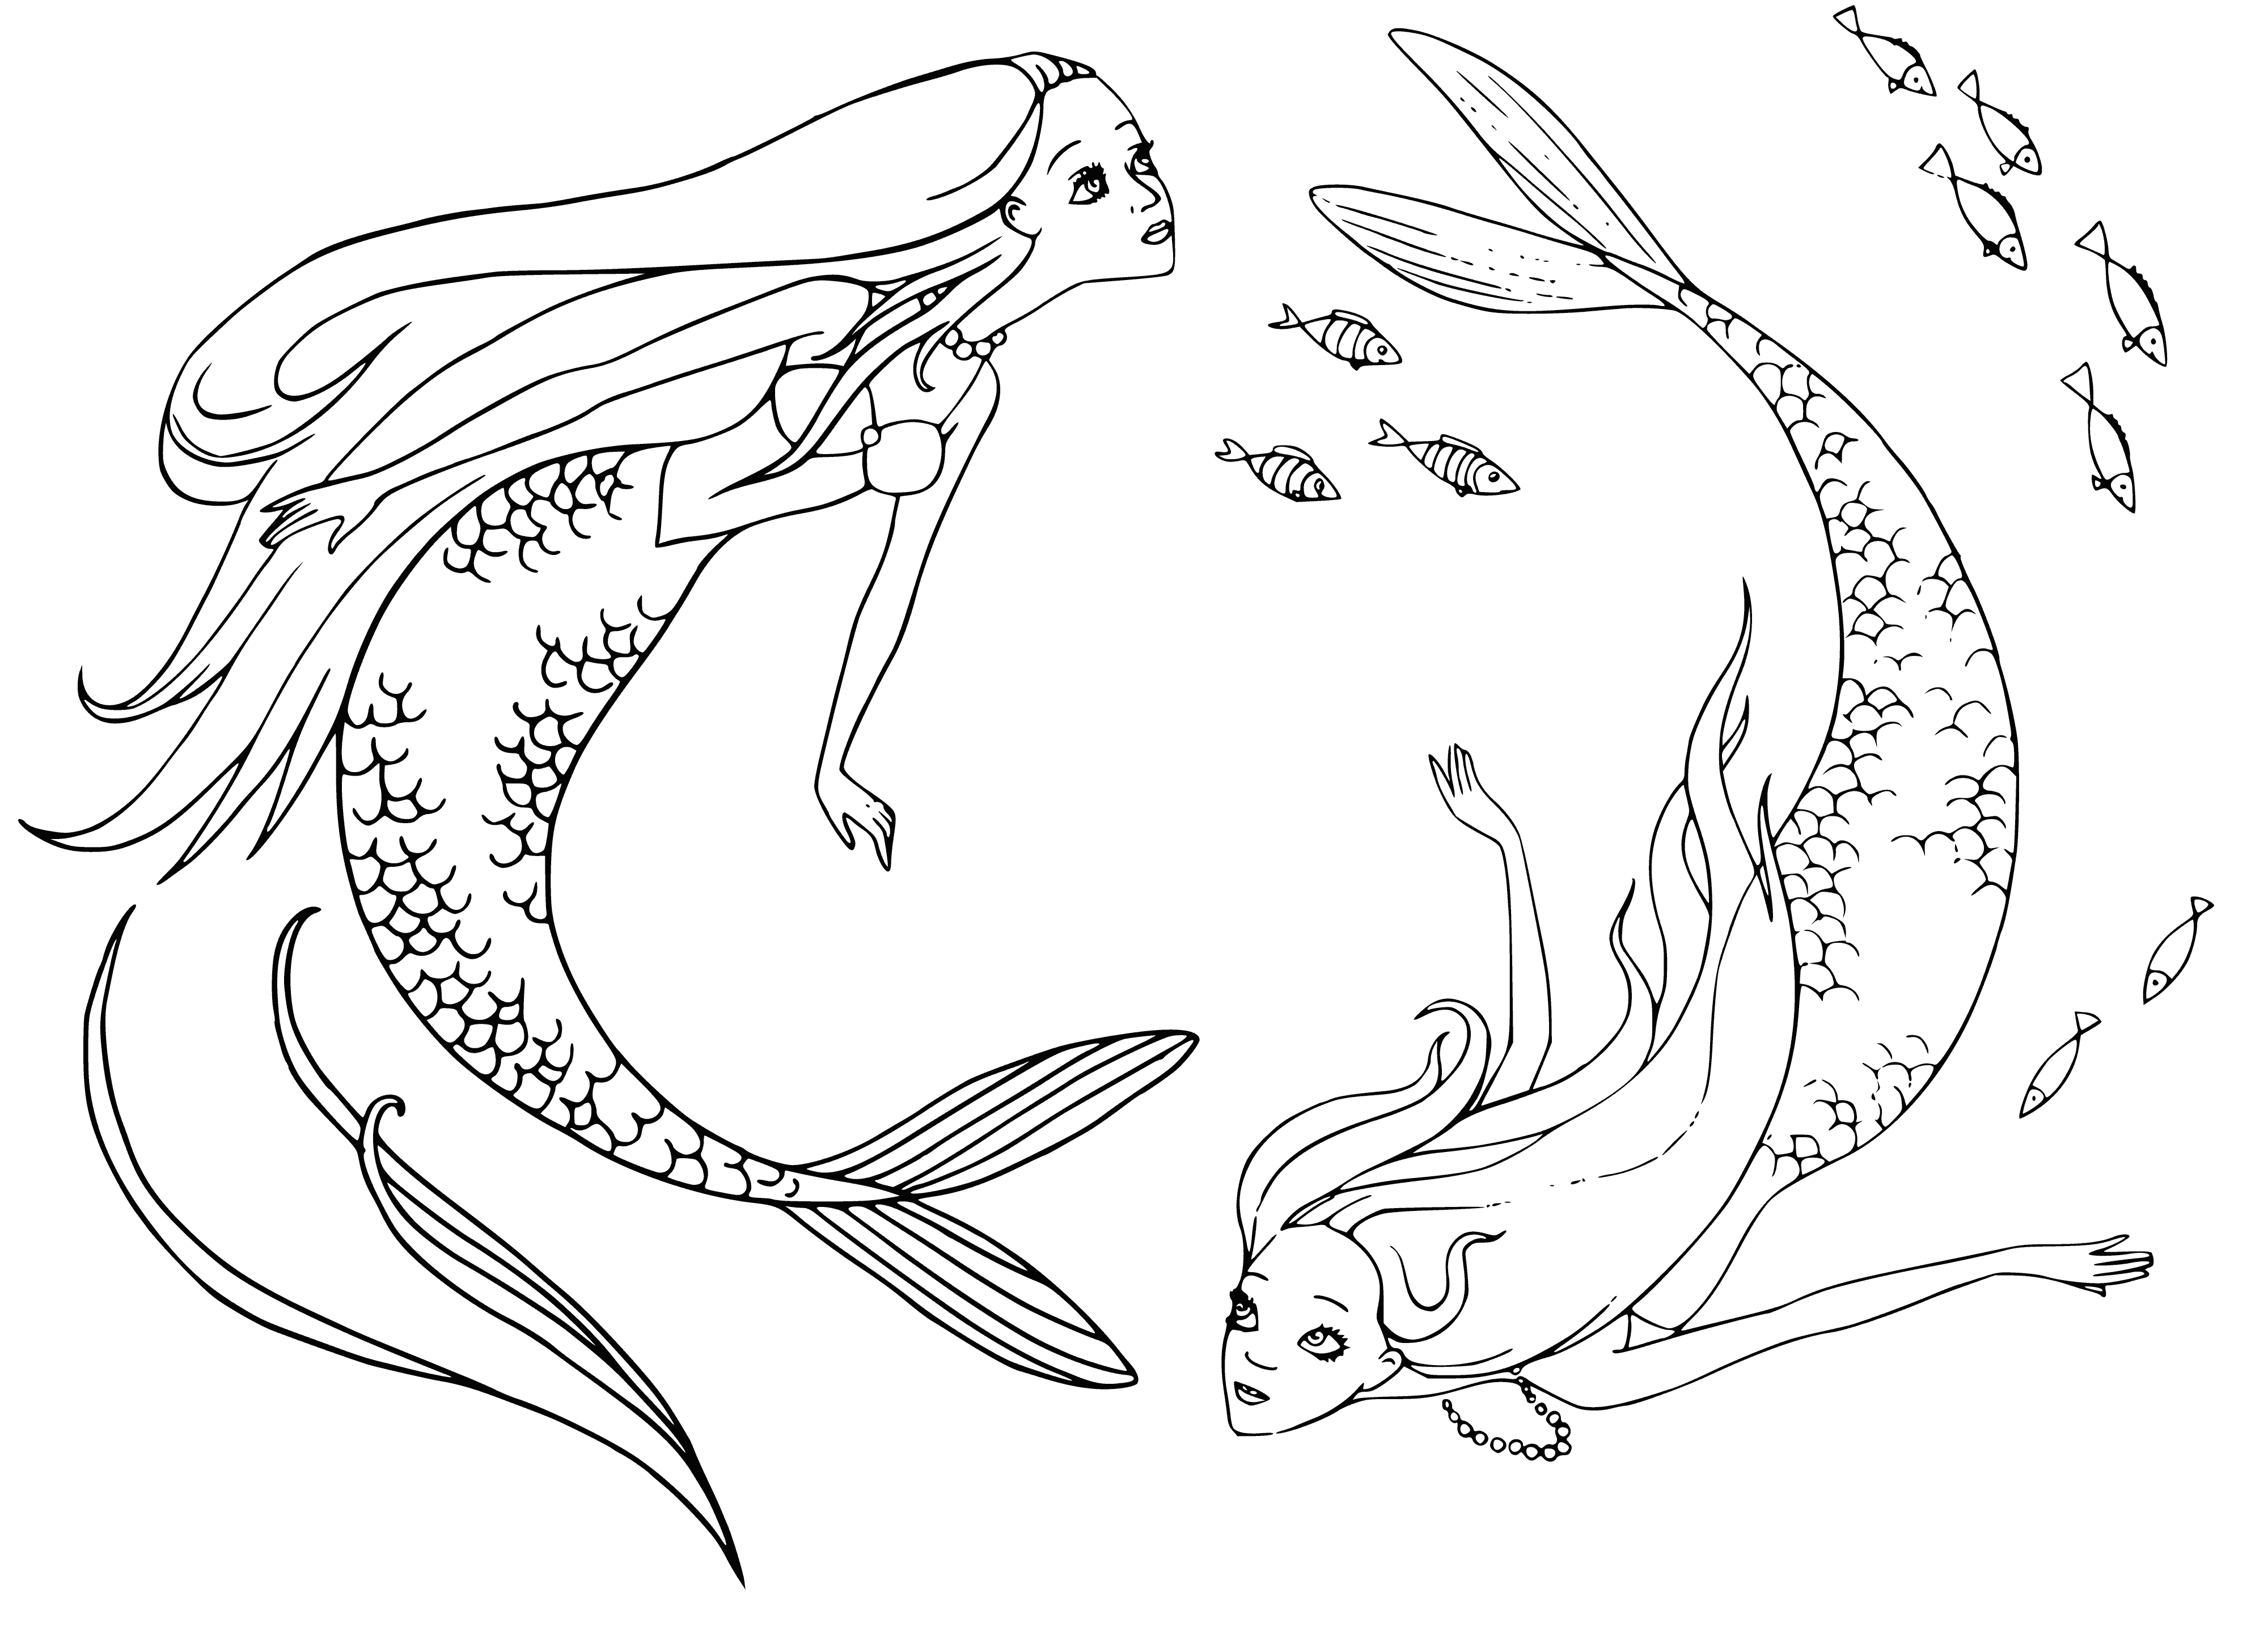 coloring page: Mermaid kingdom teems w/ life & color. Corals w/ fish & mermaids; in distance a glittering palace in sunlight.